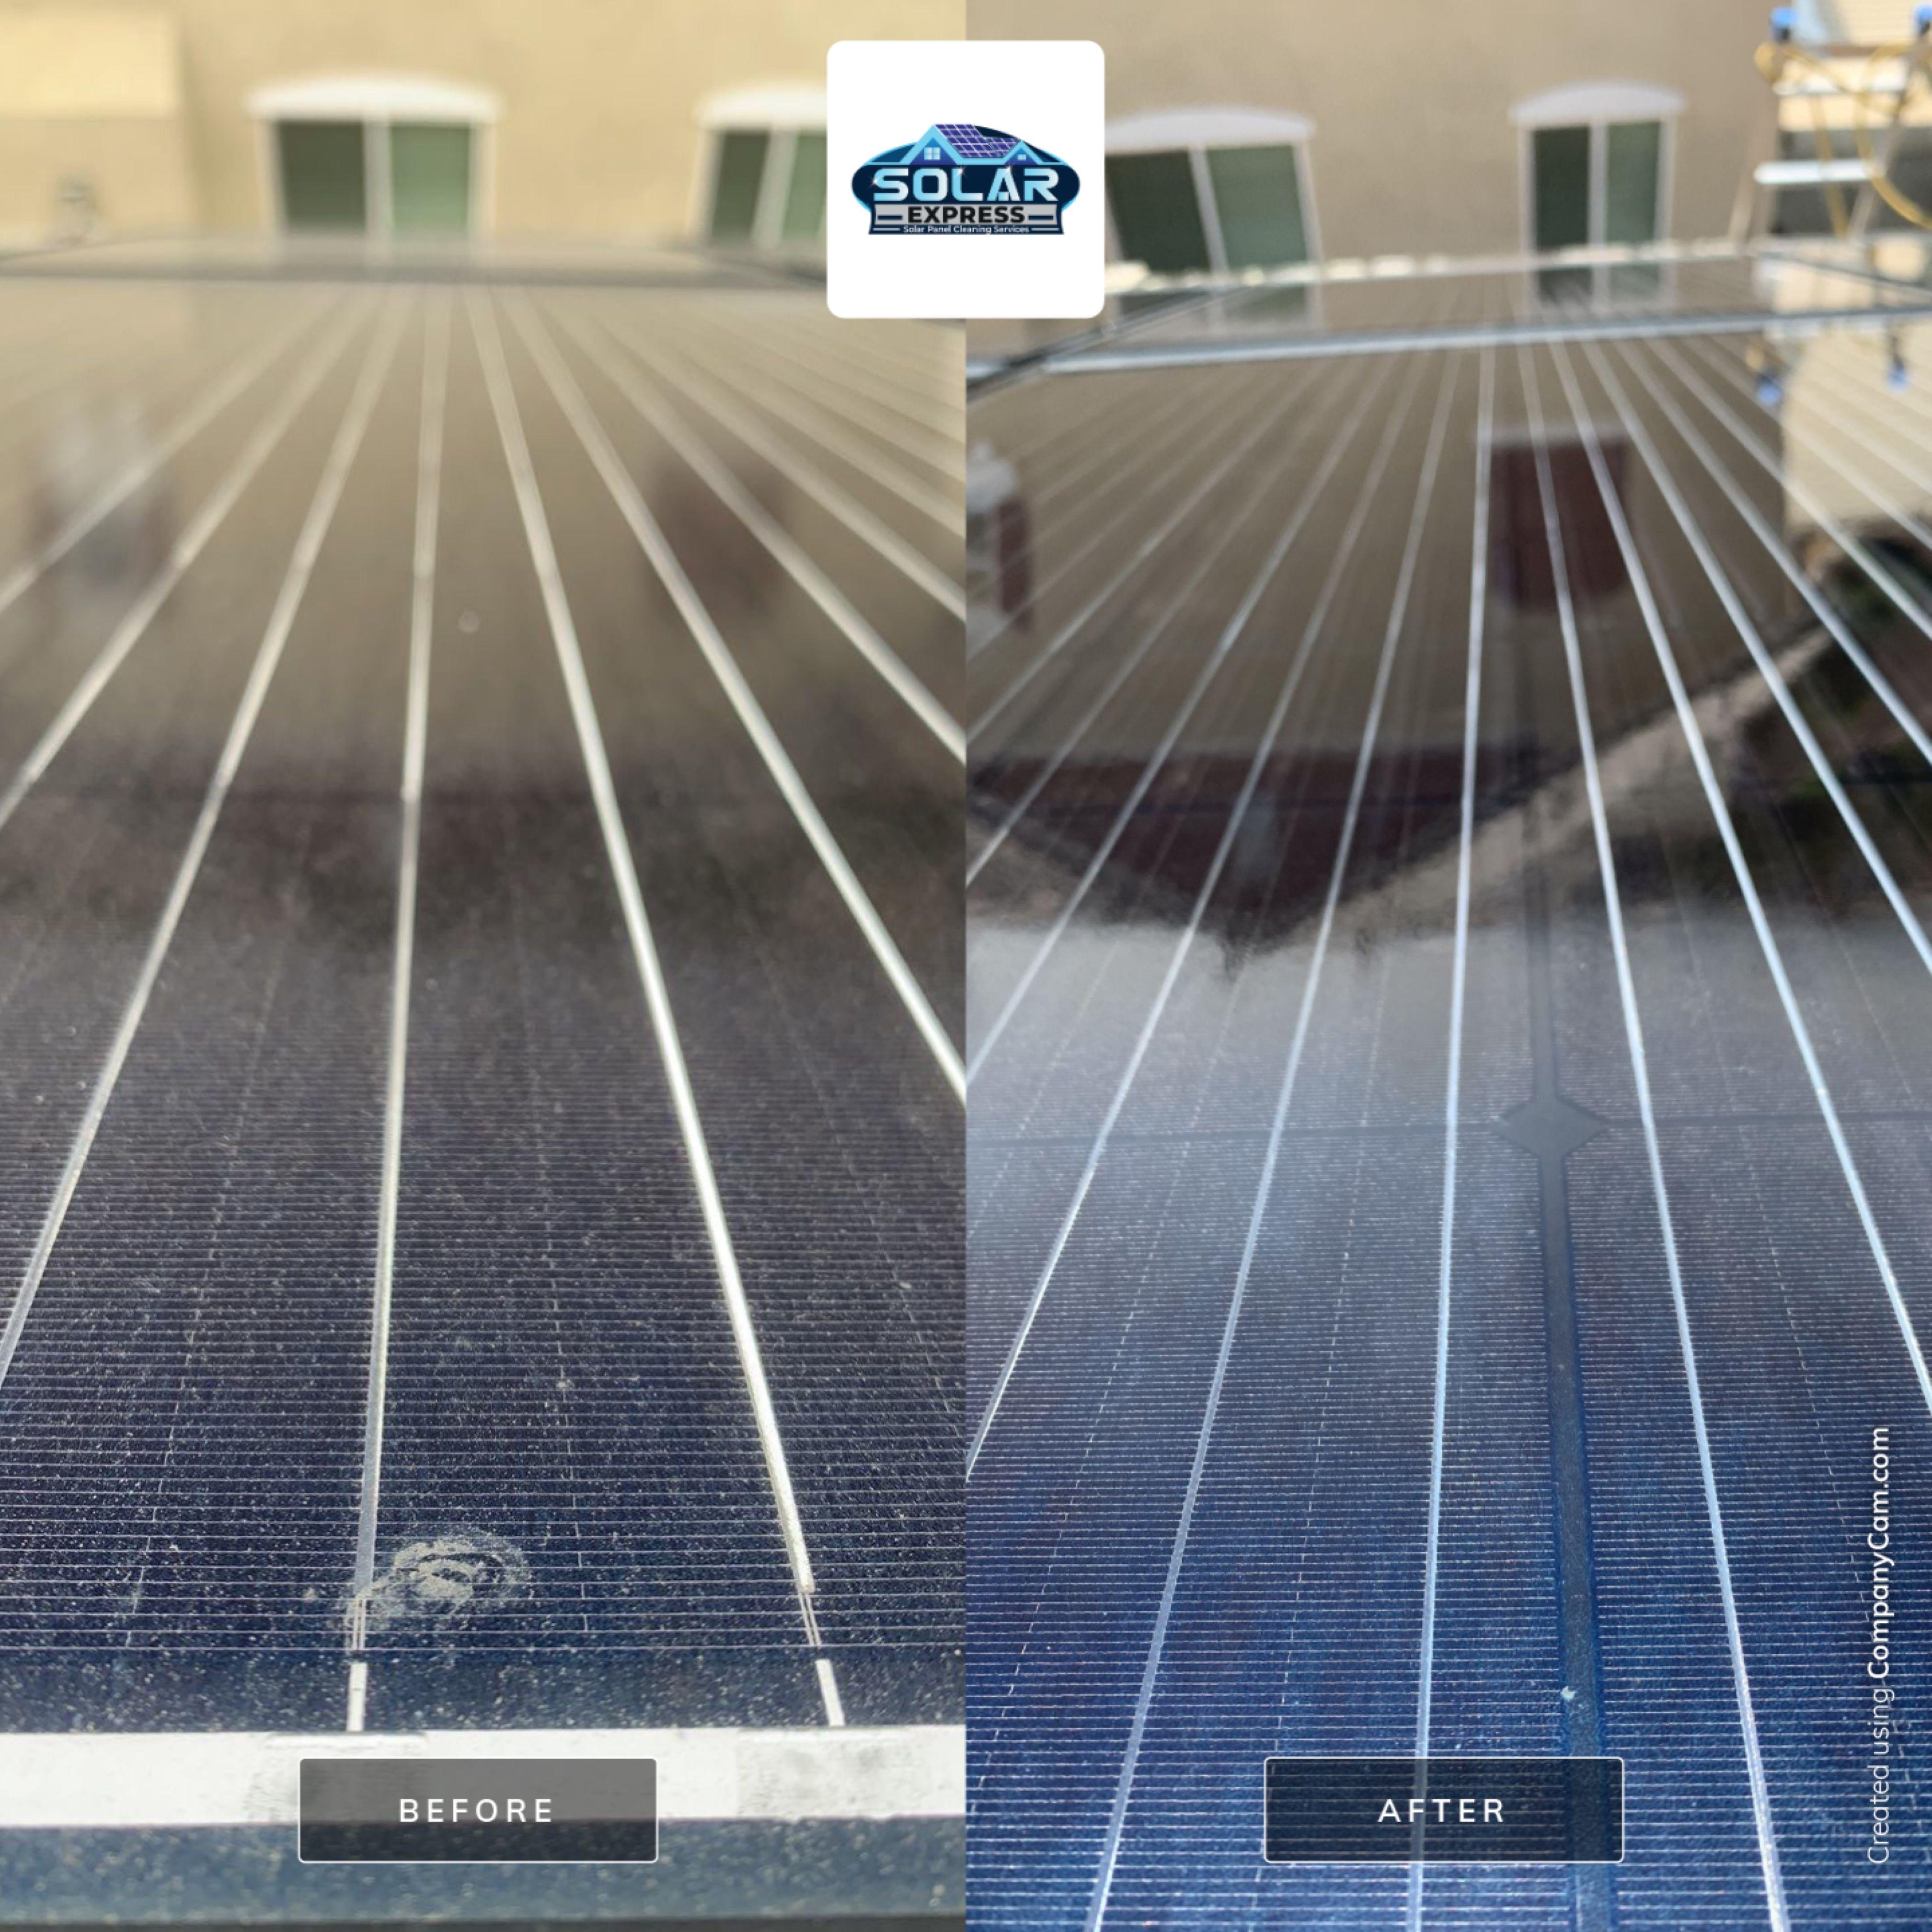 Solar Cleaning / Upland, CA / Call us today!